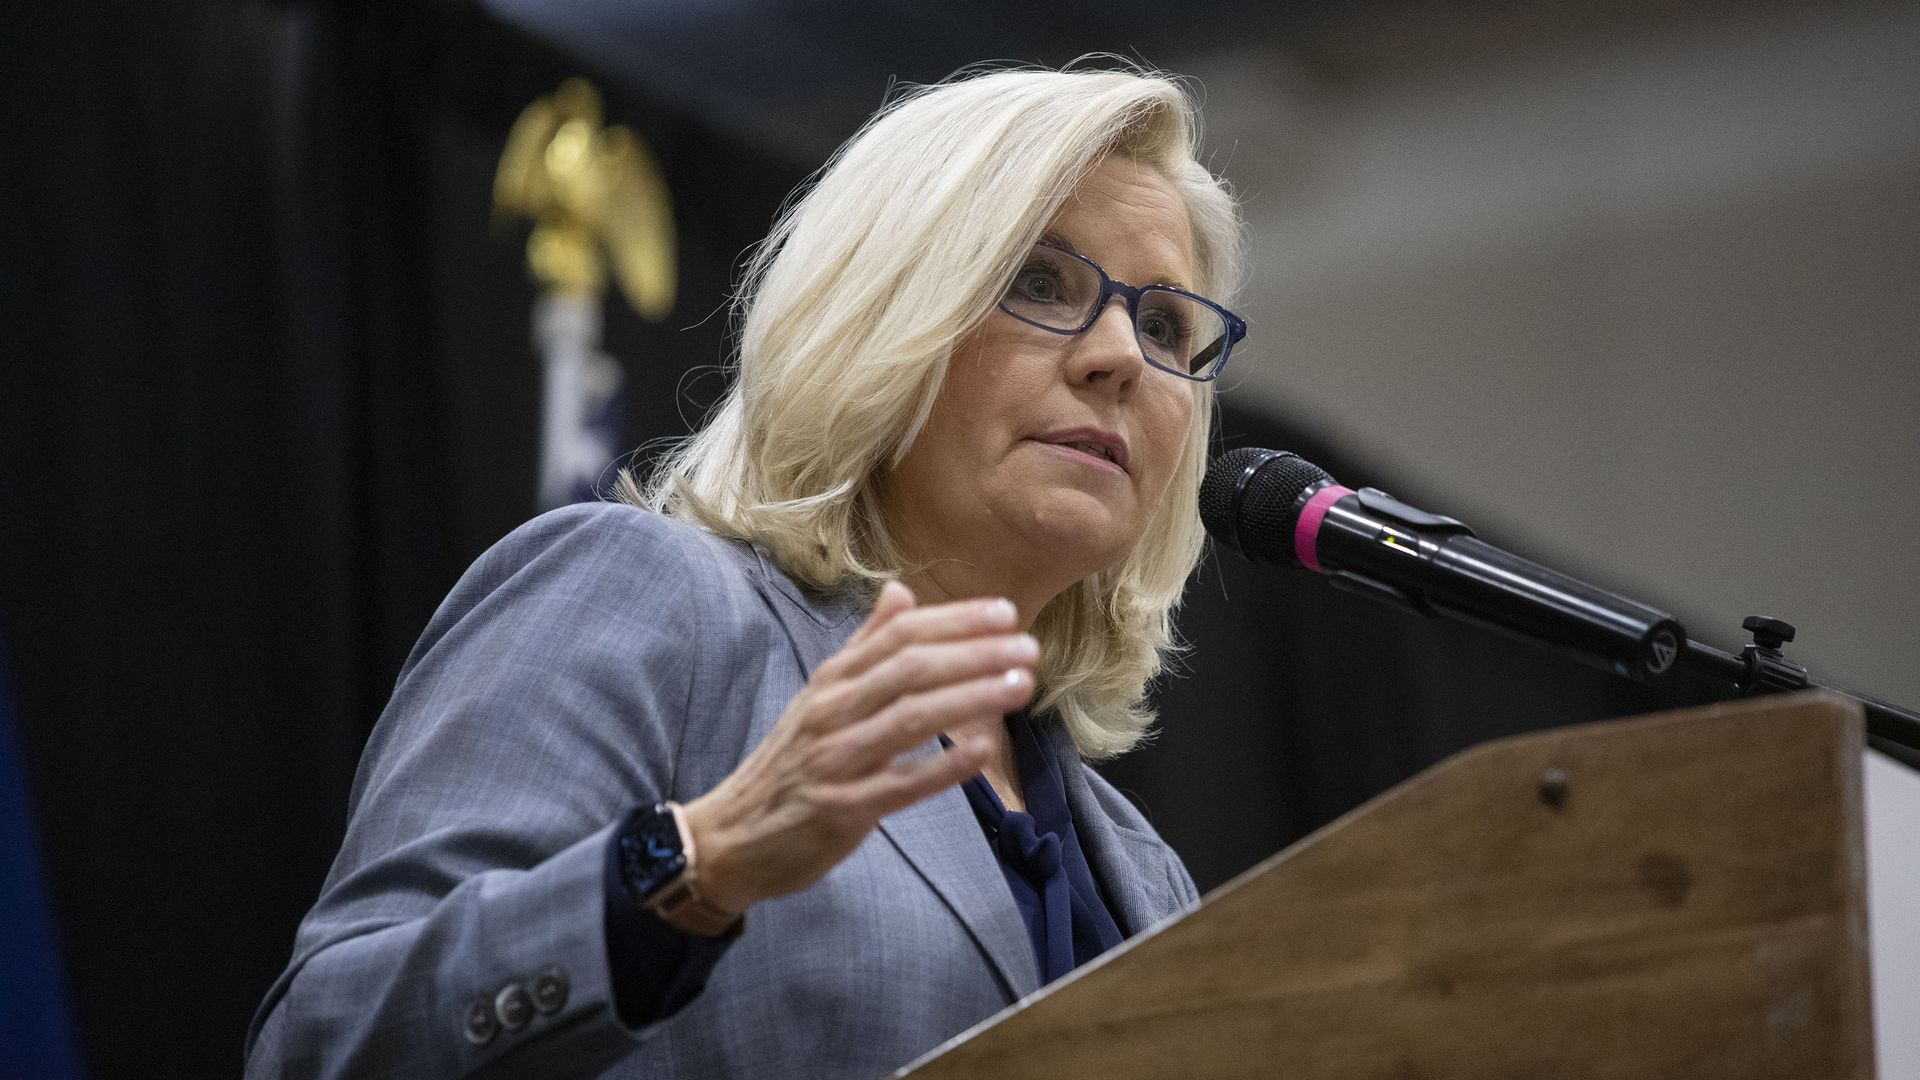 This is Liz Cheney speaking at a microphone.